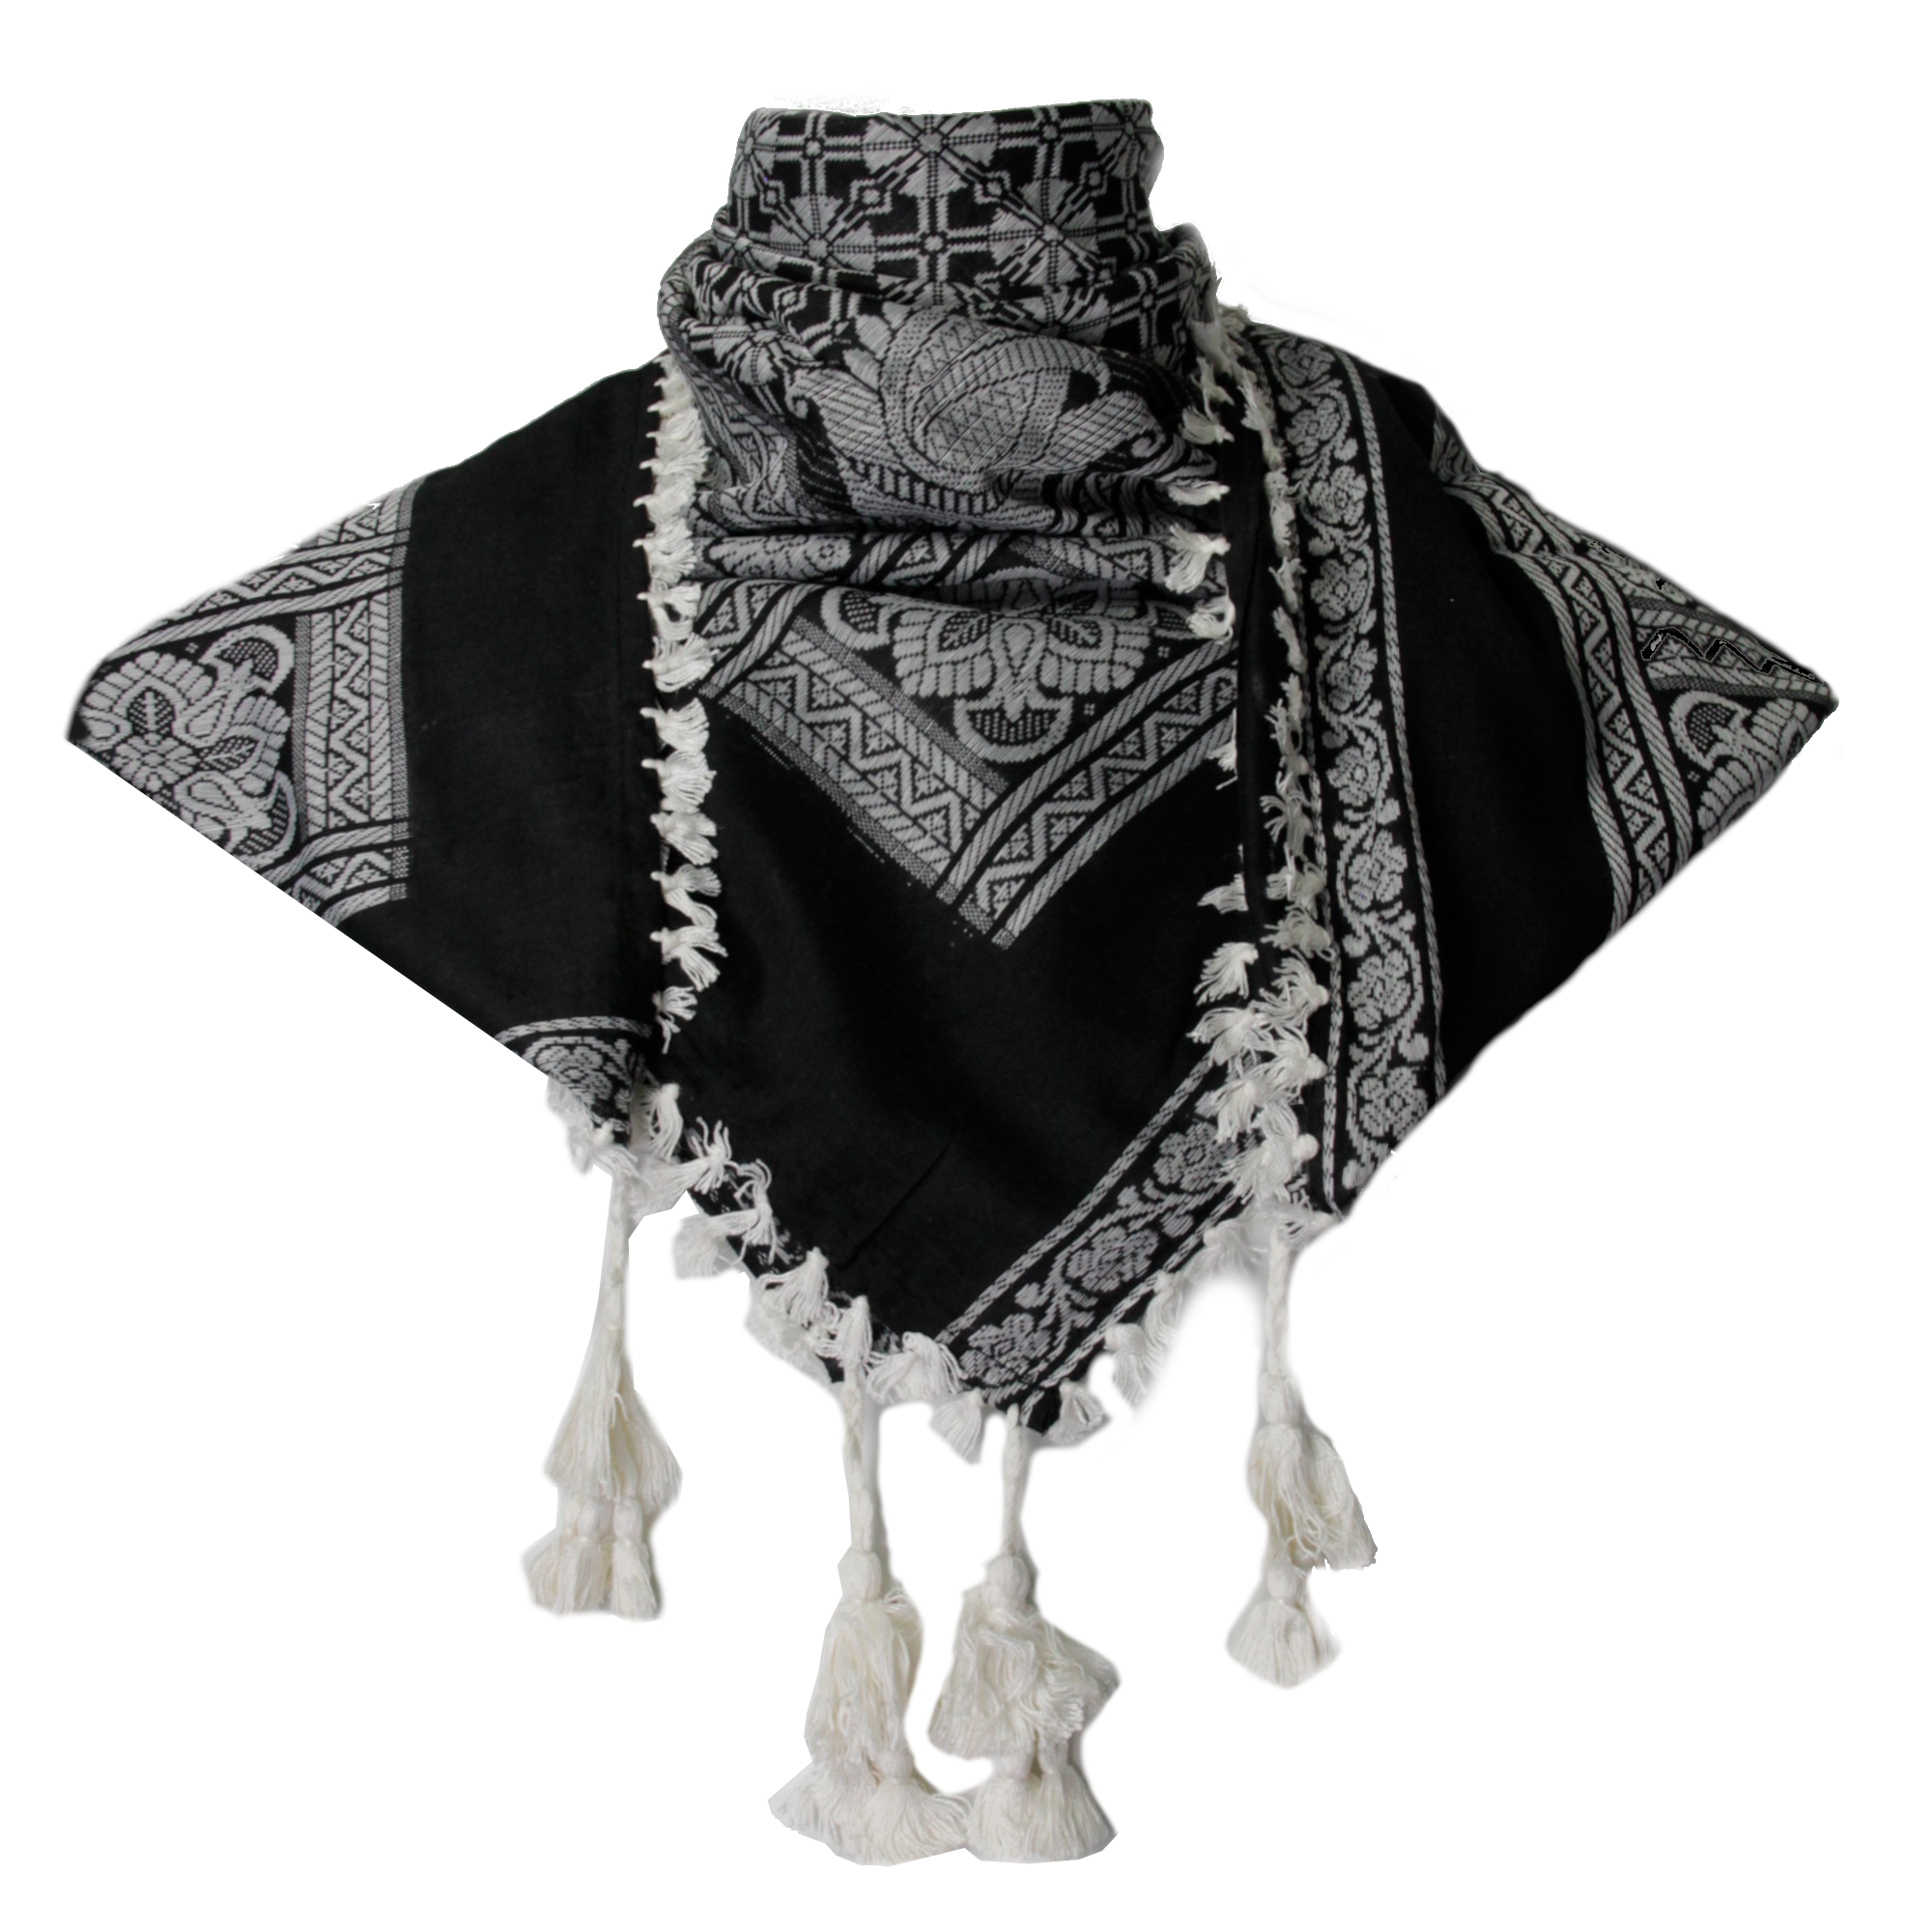 Buy Solid Plain Black Shemagh Tactical Desert Scarf Keffiyeh at